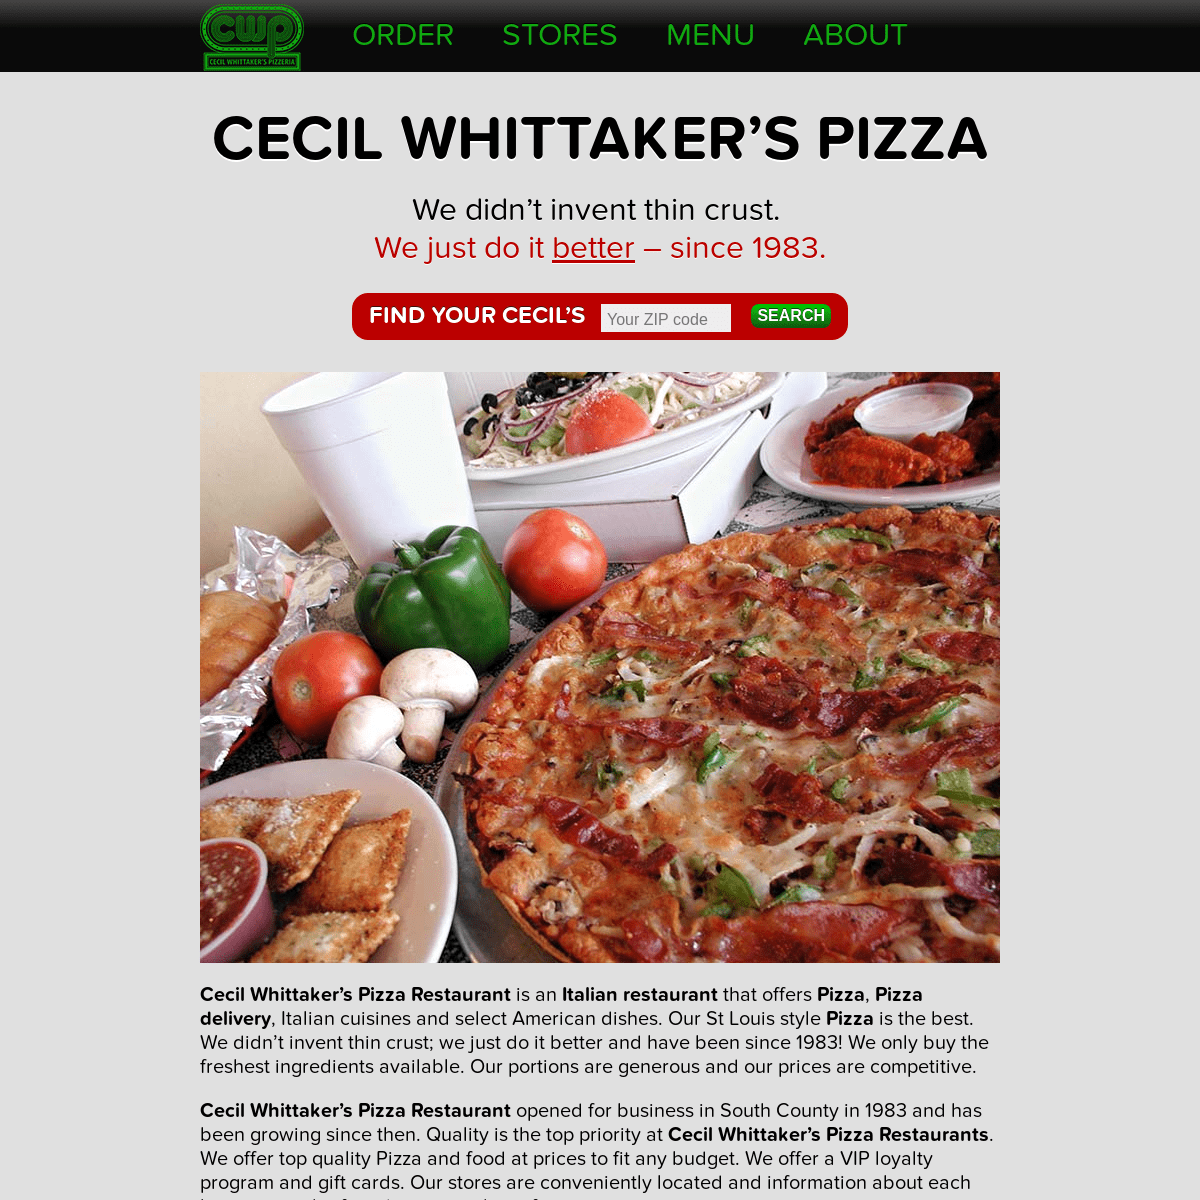 A complete backup of cwpizza.com